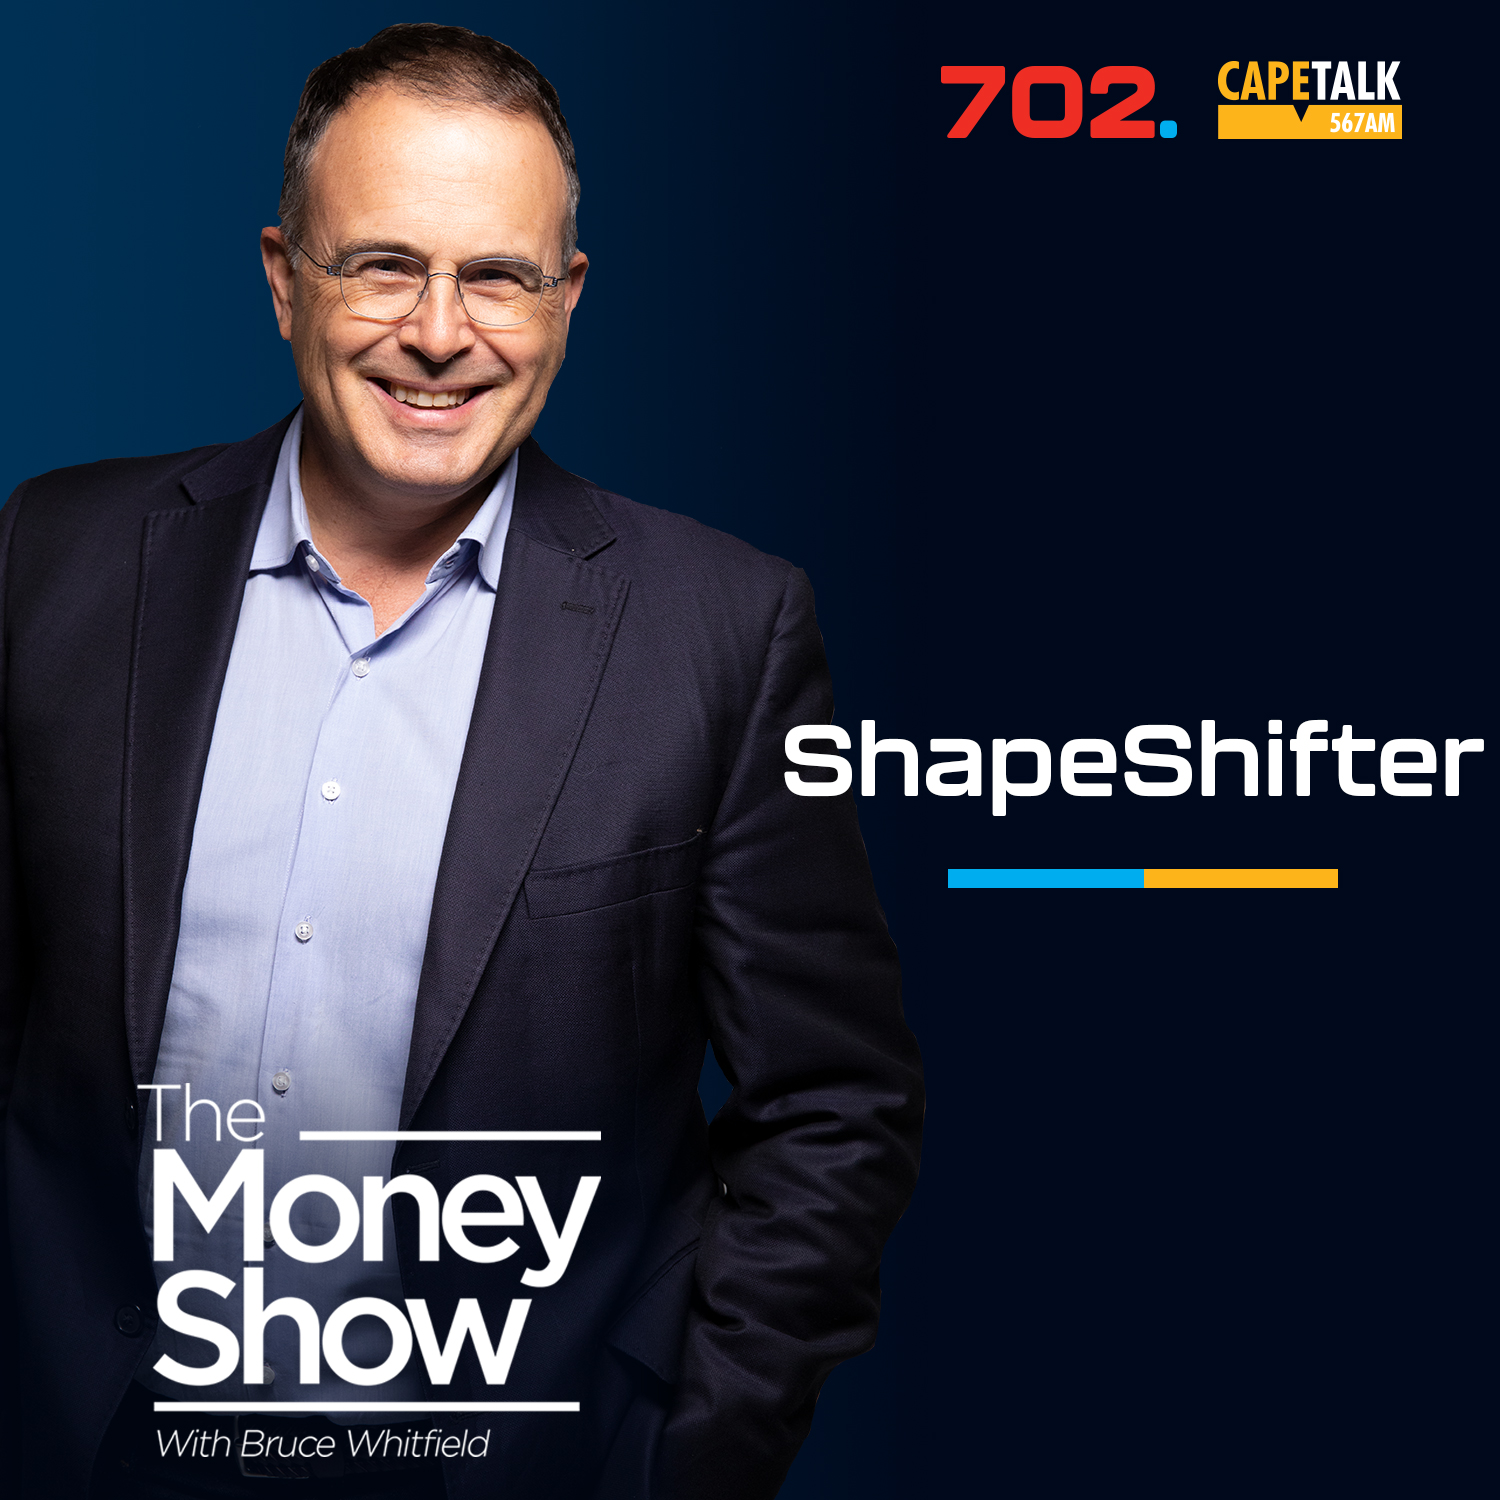 Shapeshifter -  Steven Kark, the co-founder and Group CEO of Paycorp, an international payments company based in South Africa